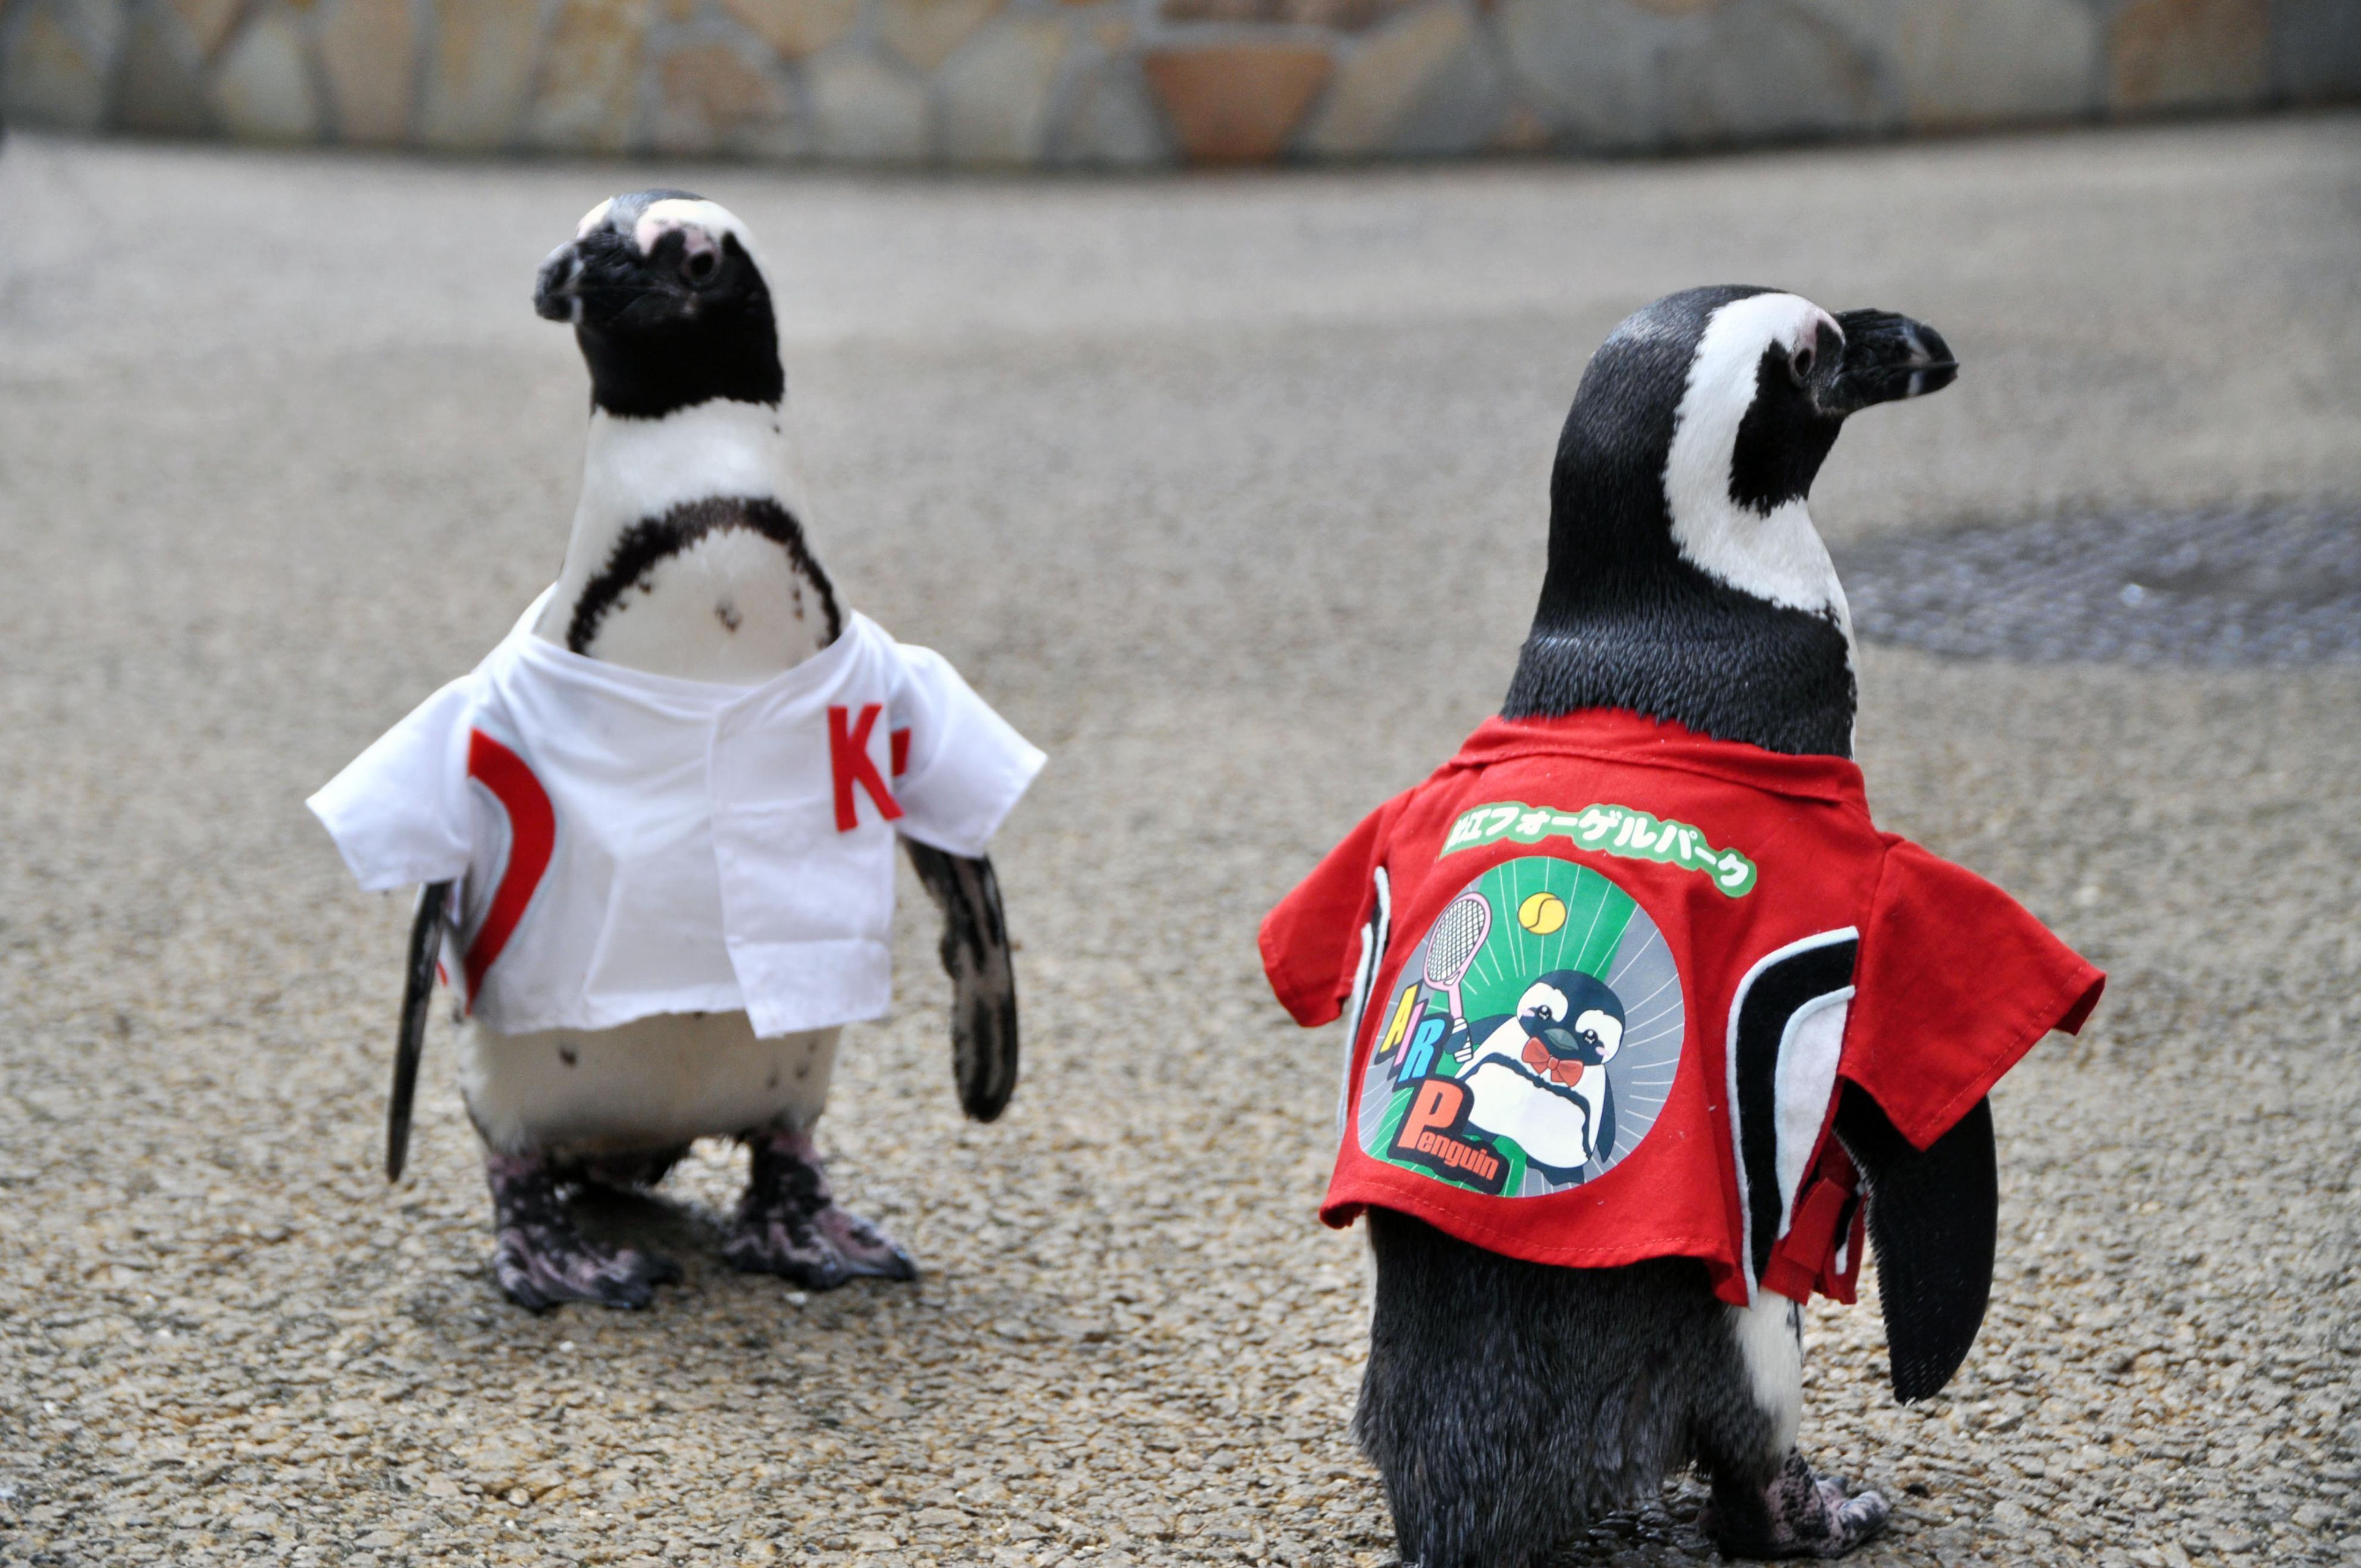 MATSUE, Japan - Penguins in Matsue Vogel Park walk in costumes featuring Air K, the nickname for a leaping forehand shot of tennis player Kei Nishikori, ahead of his U.S. Open final in New York, Matsue, Japan, Sept. 8, 2014.